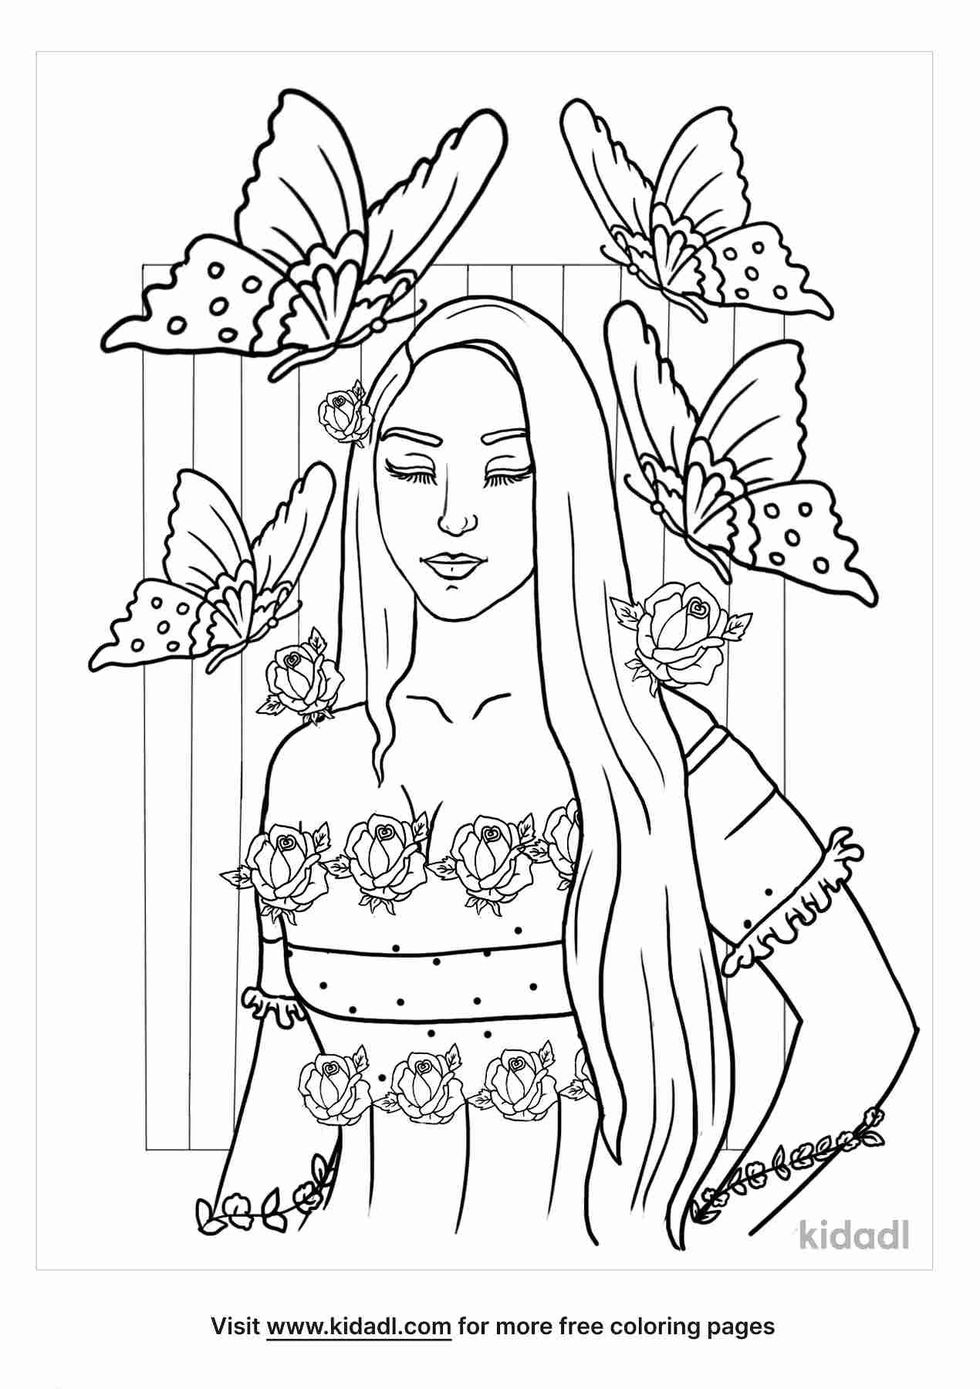 Beautiful lady coloring page for ten year old girls.